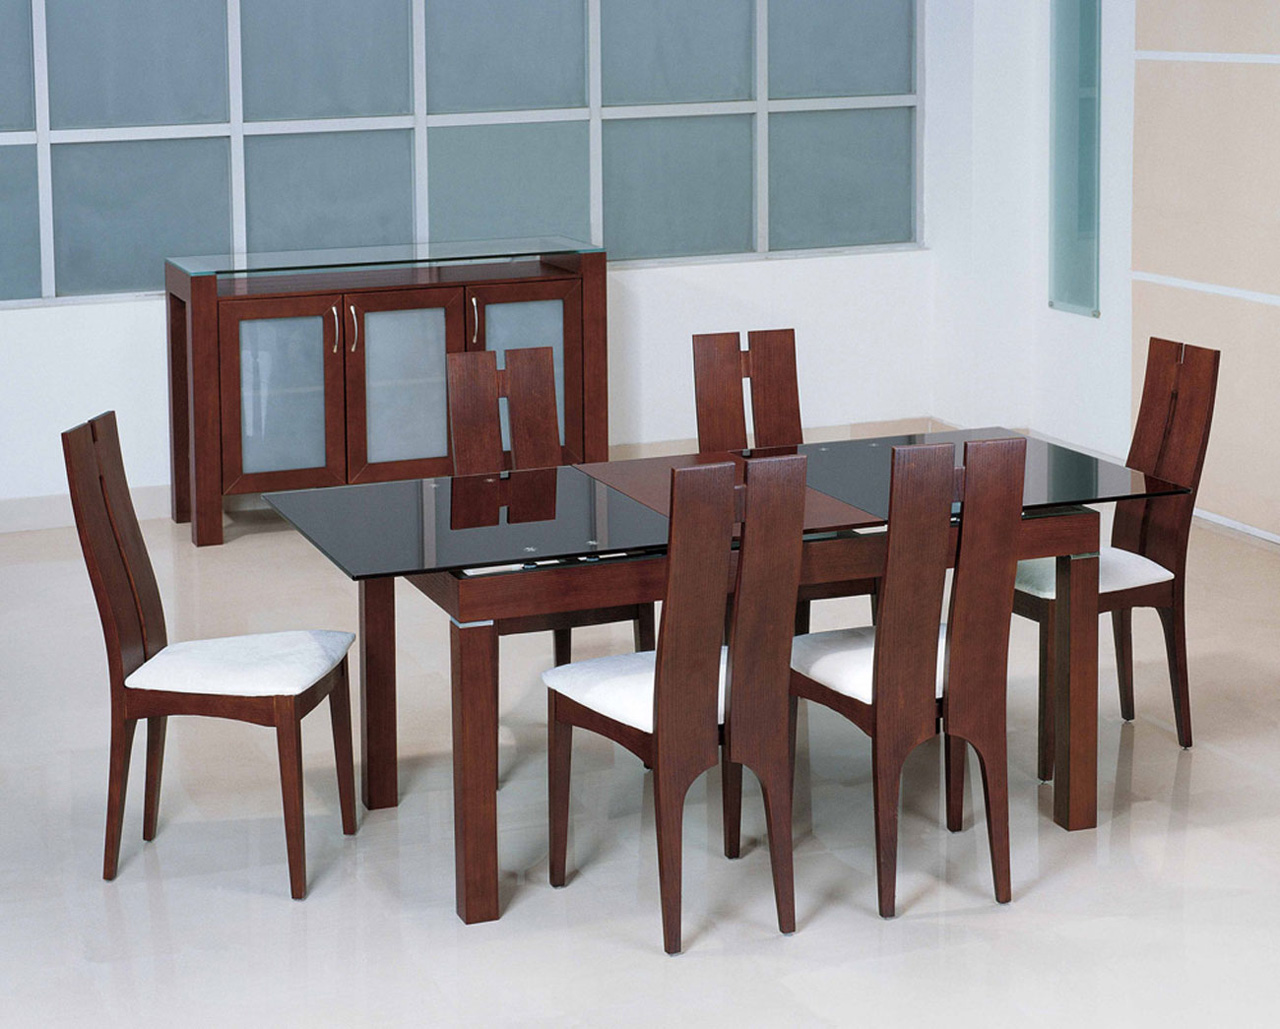 Black Glass Tables Natural Black Glass Dining Room Tables With Six Chairs Design Ideas Also Creative Ladder Back Chairs With Wood Seats Dining Room Tables Design Also Wooden Cabinet For Small Space Dining Room Dining Room Choosing The Right Dining Room Tables